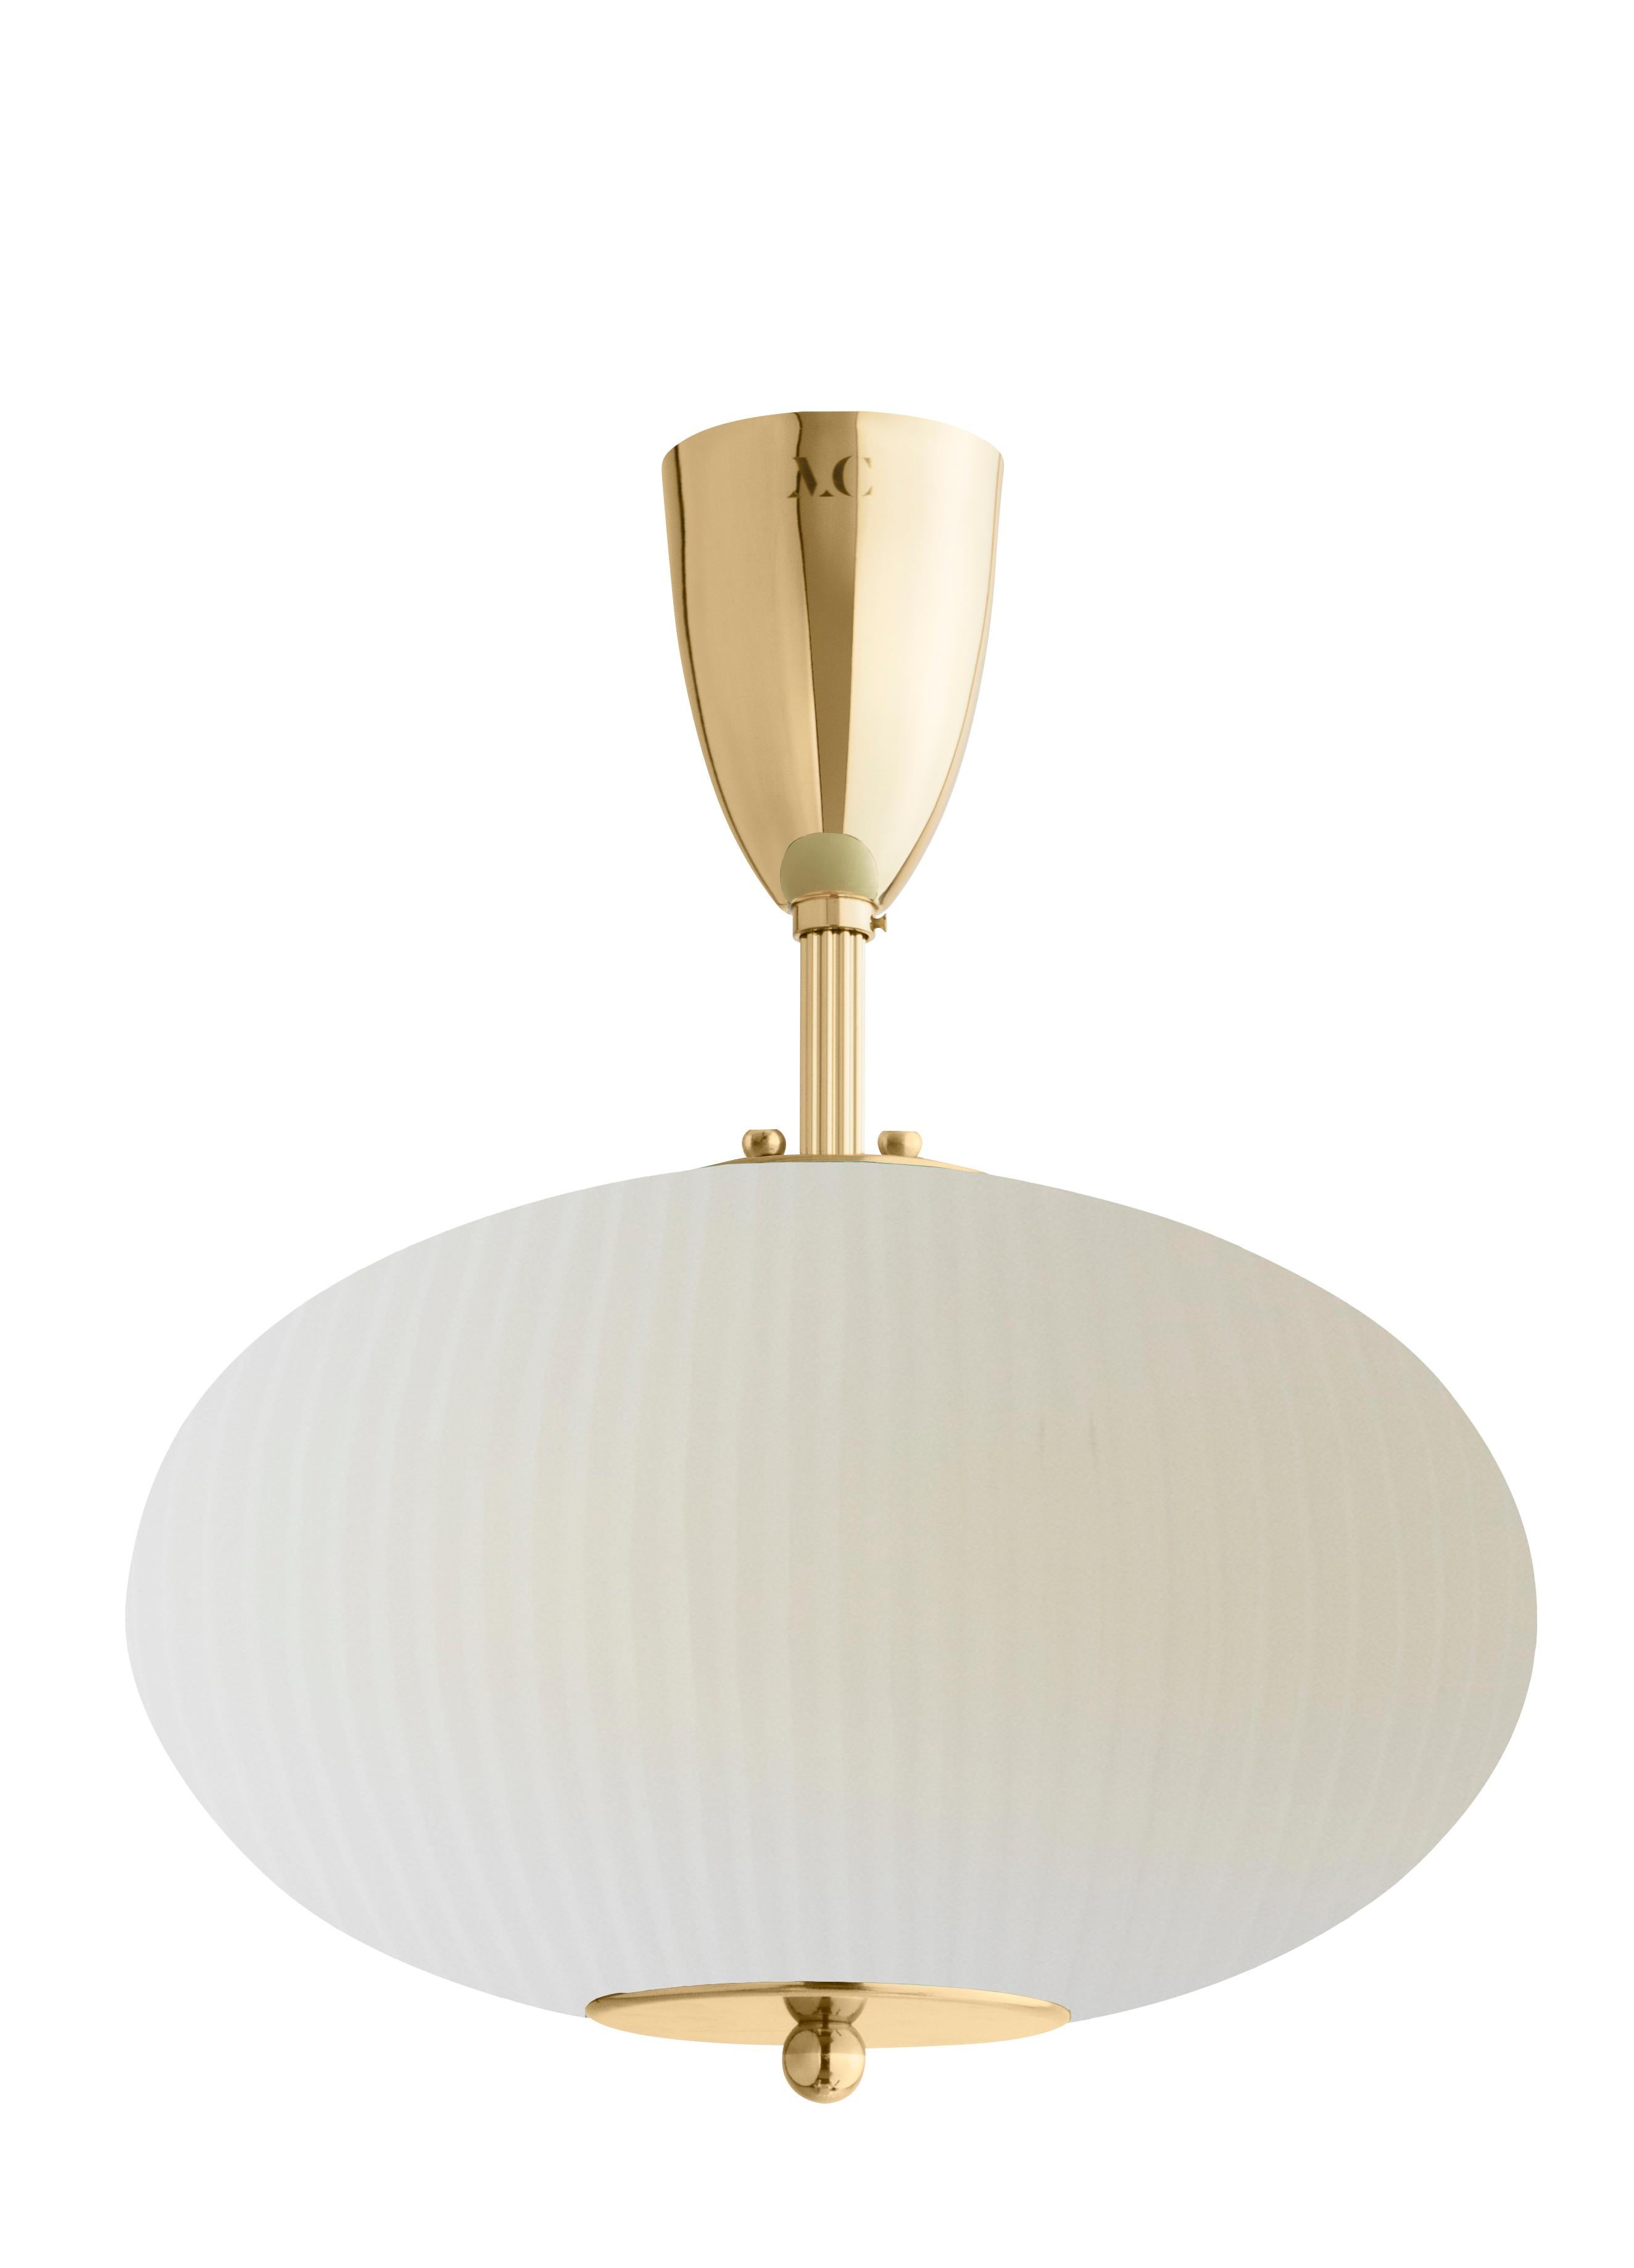 Ceiling lamp china 07 by Magic Circus Editions
Dimensions: H 40 x W 32 x D 32 cm
Materials: Brass, mouth blown glass sculpted with a diamond saw
Colour: ivory

Available finishes: Brass, nickel
Available colours: enamel soft white, soft rose,